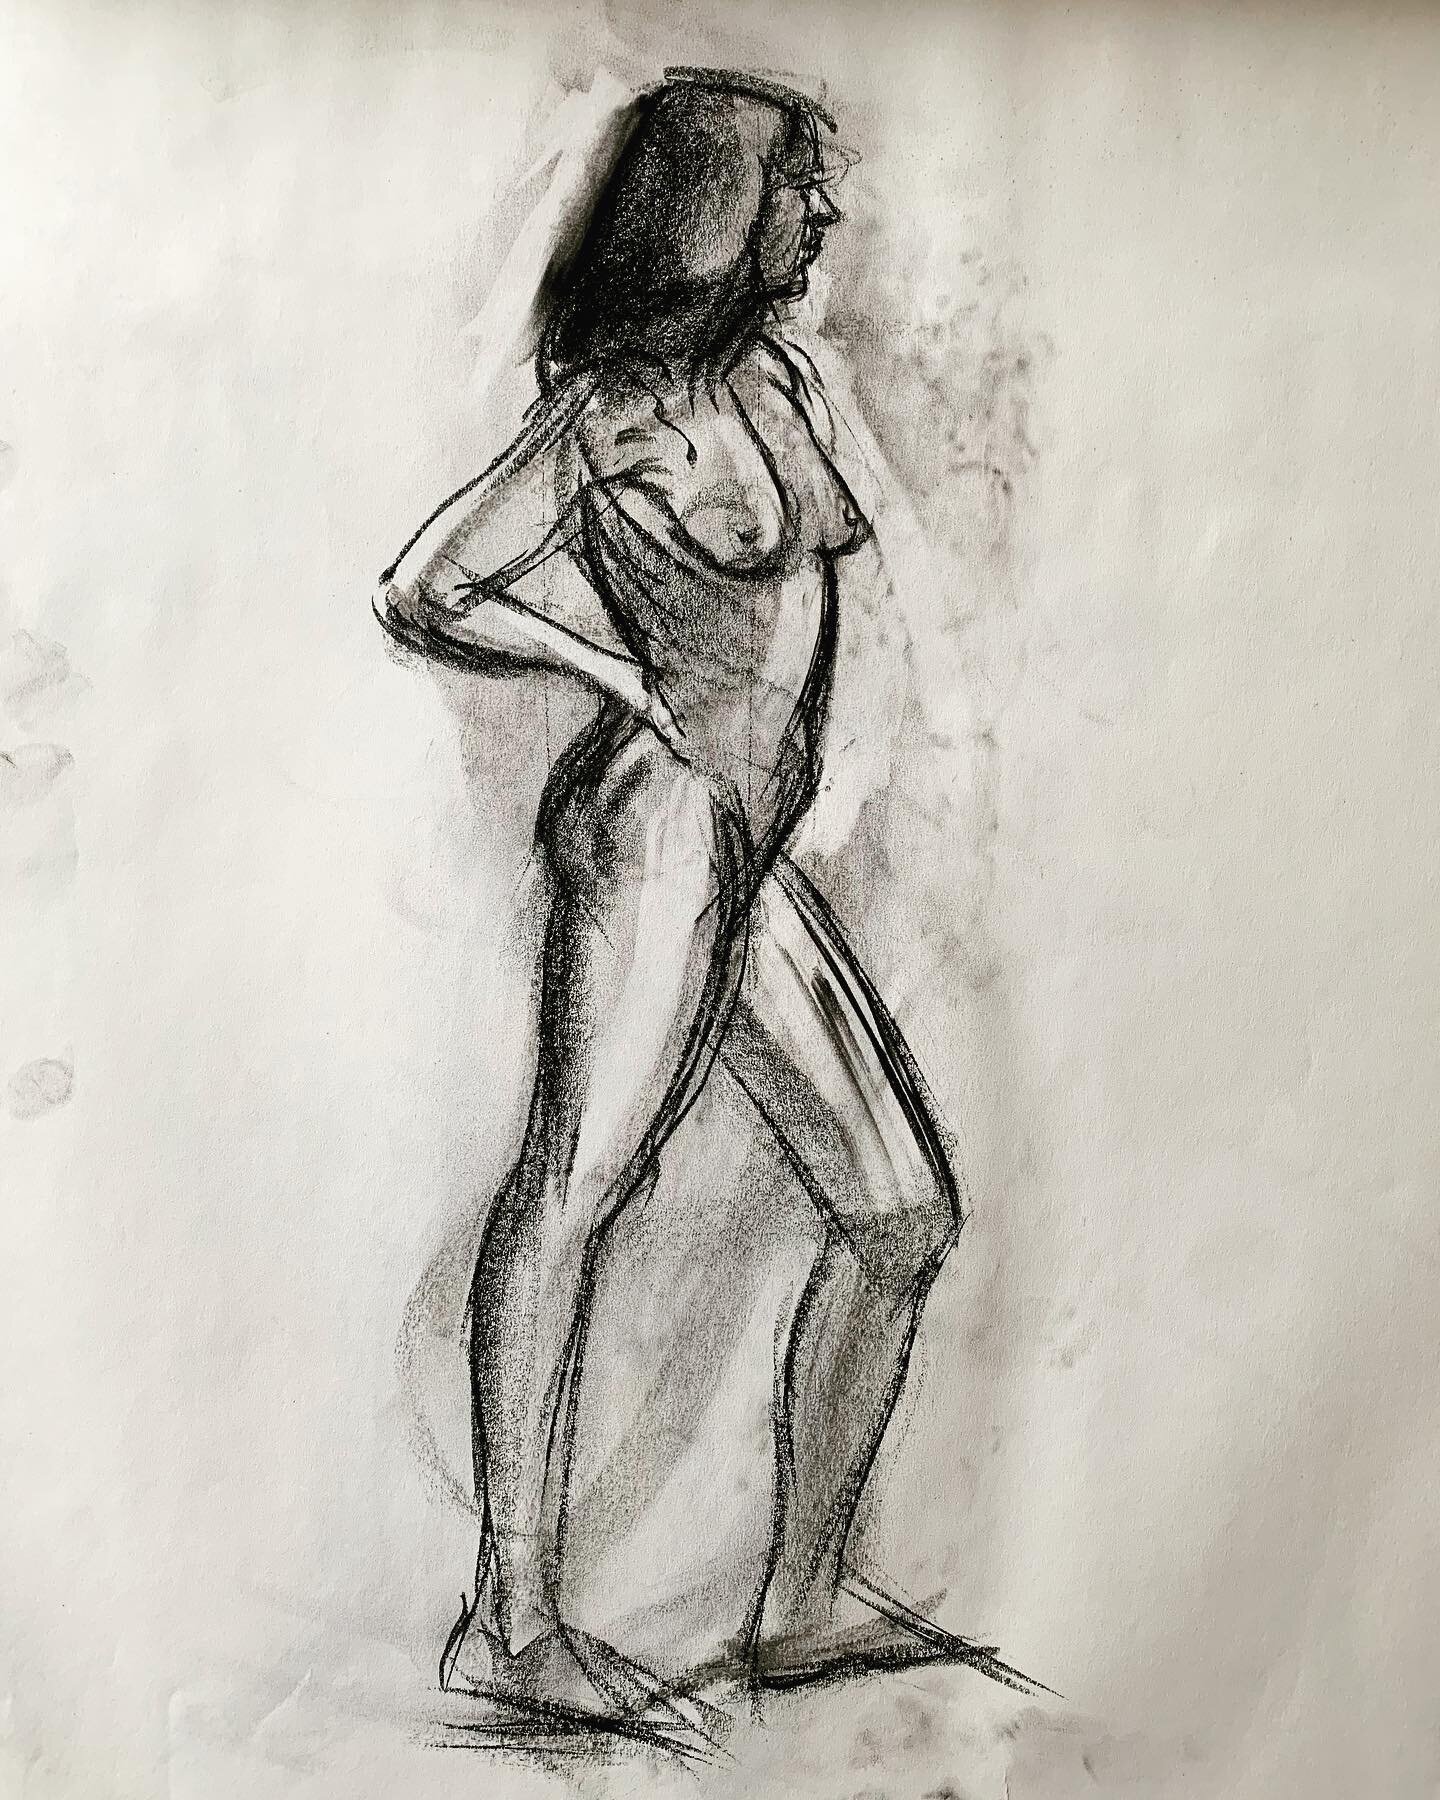 Super rusty but damn feels good to be life drawing again.